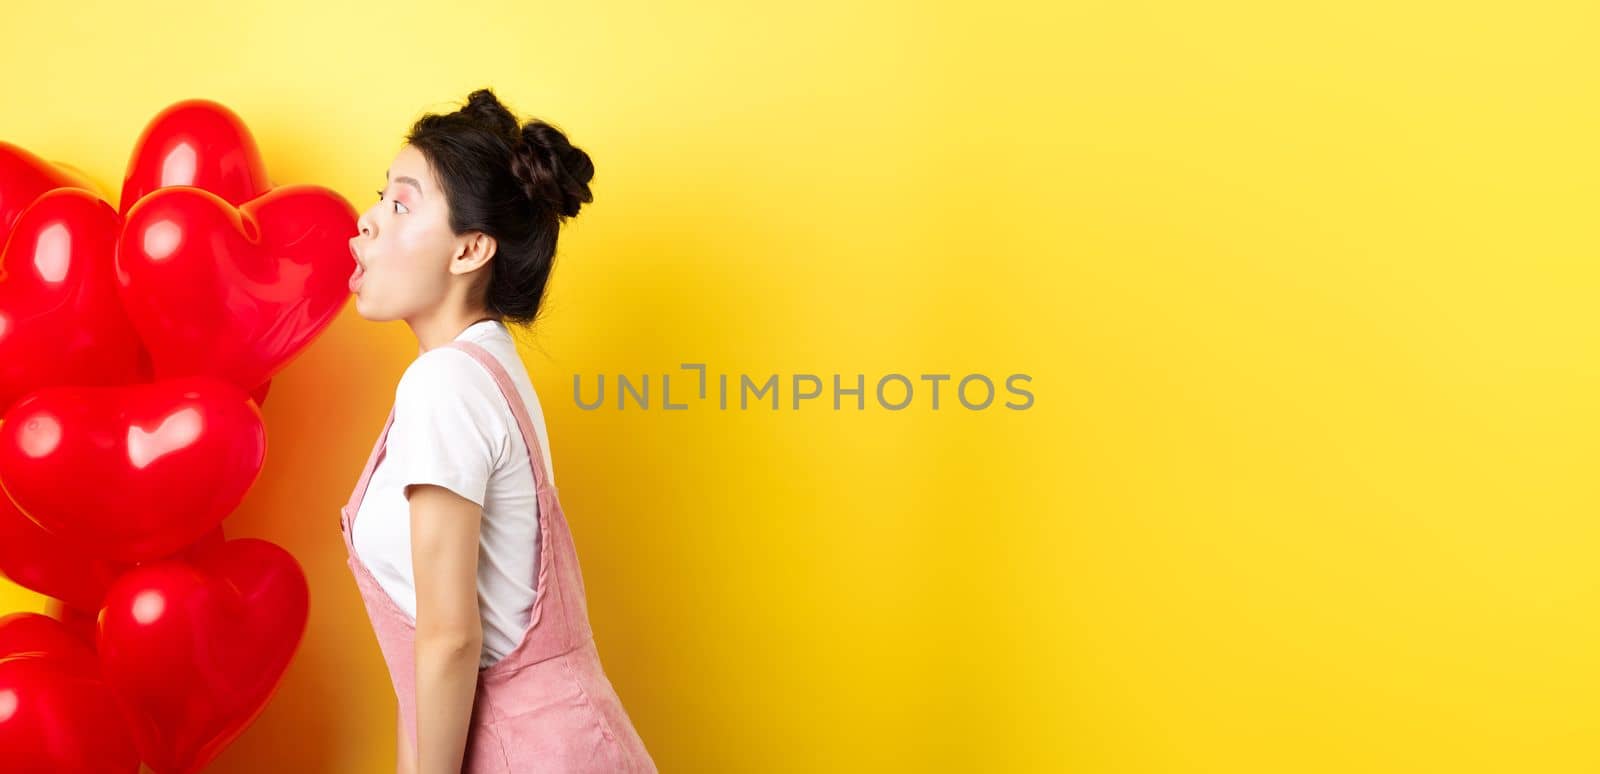 Valentines day and relationship concept. Profile of young asian woman scream of surprise, say wow and looking left amazed, standing near red balloons, yellow background.